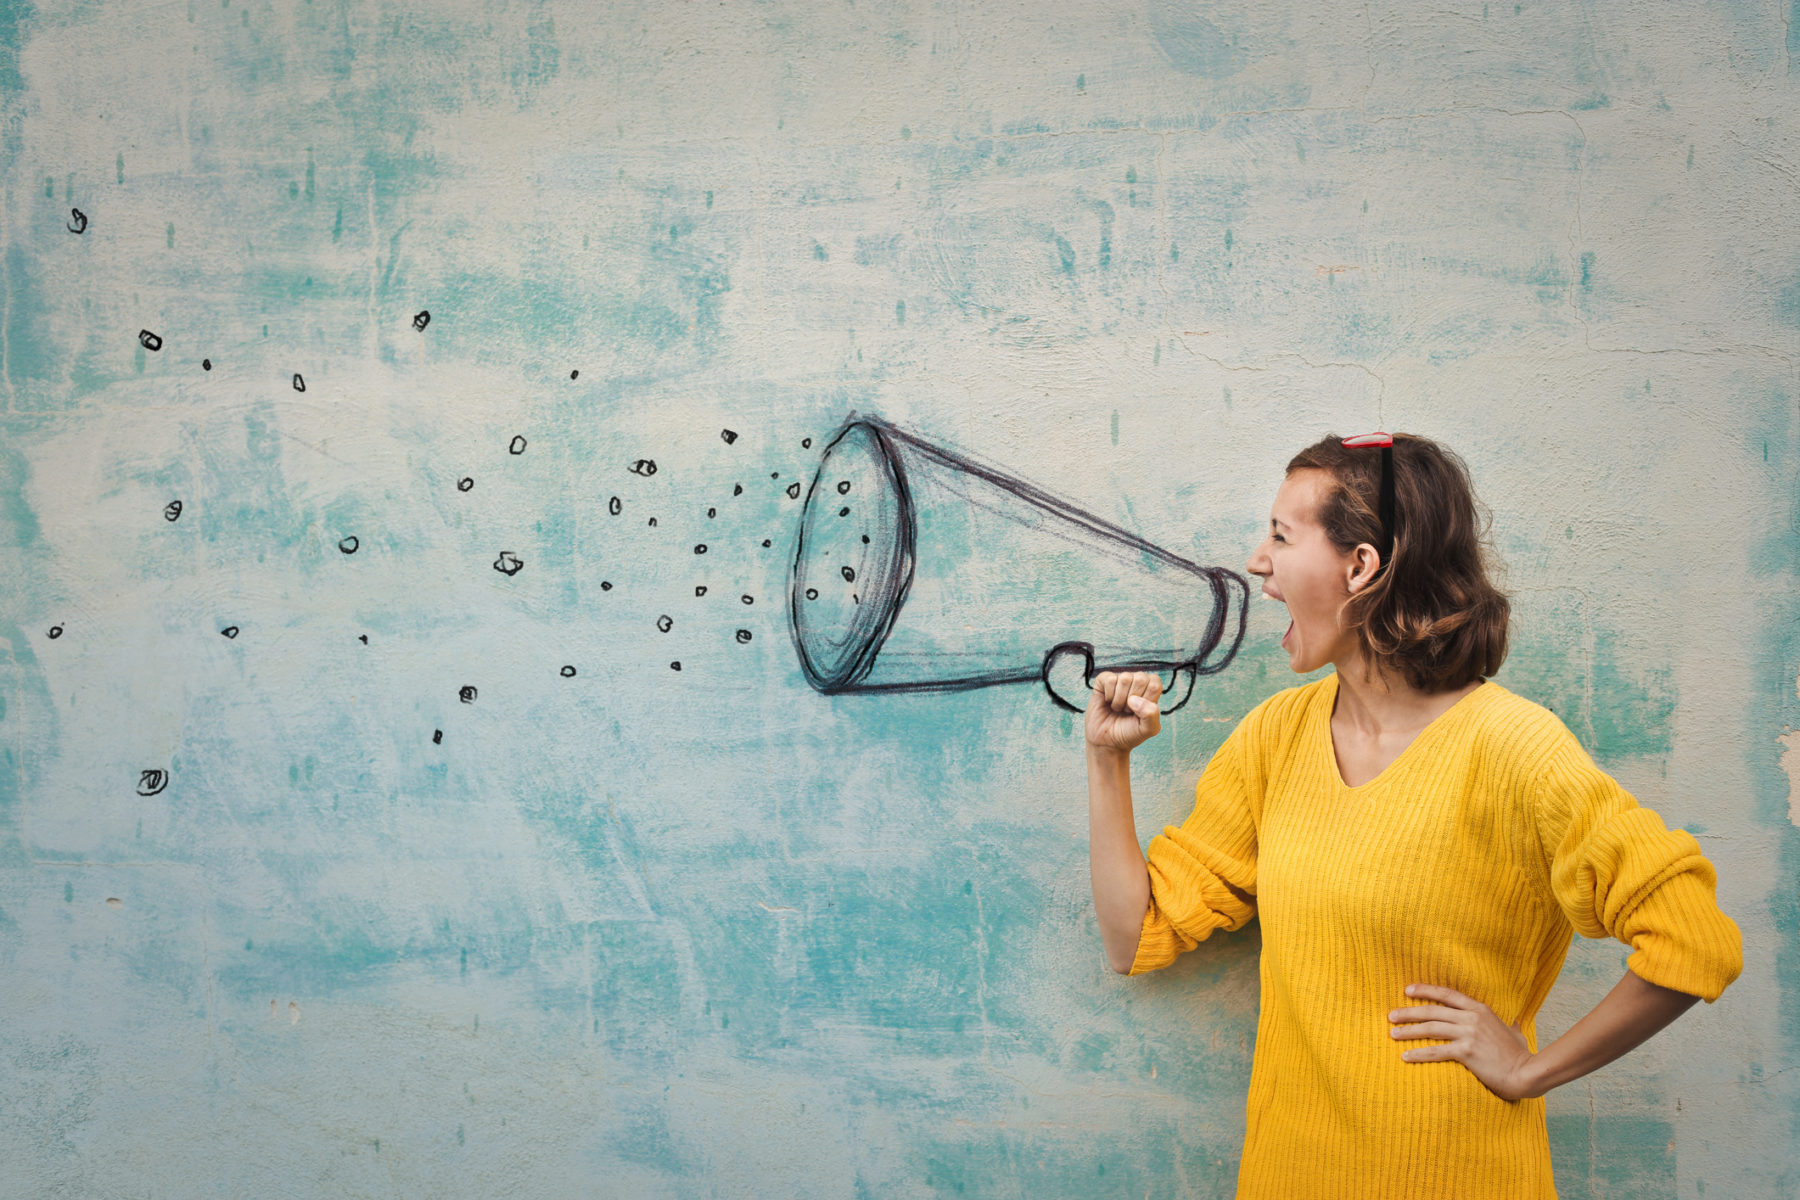 Young woman holding an imaginary megaphone and shouting into it, representing small business marketing communications